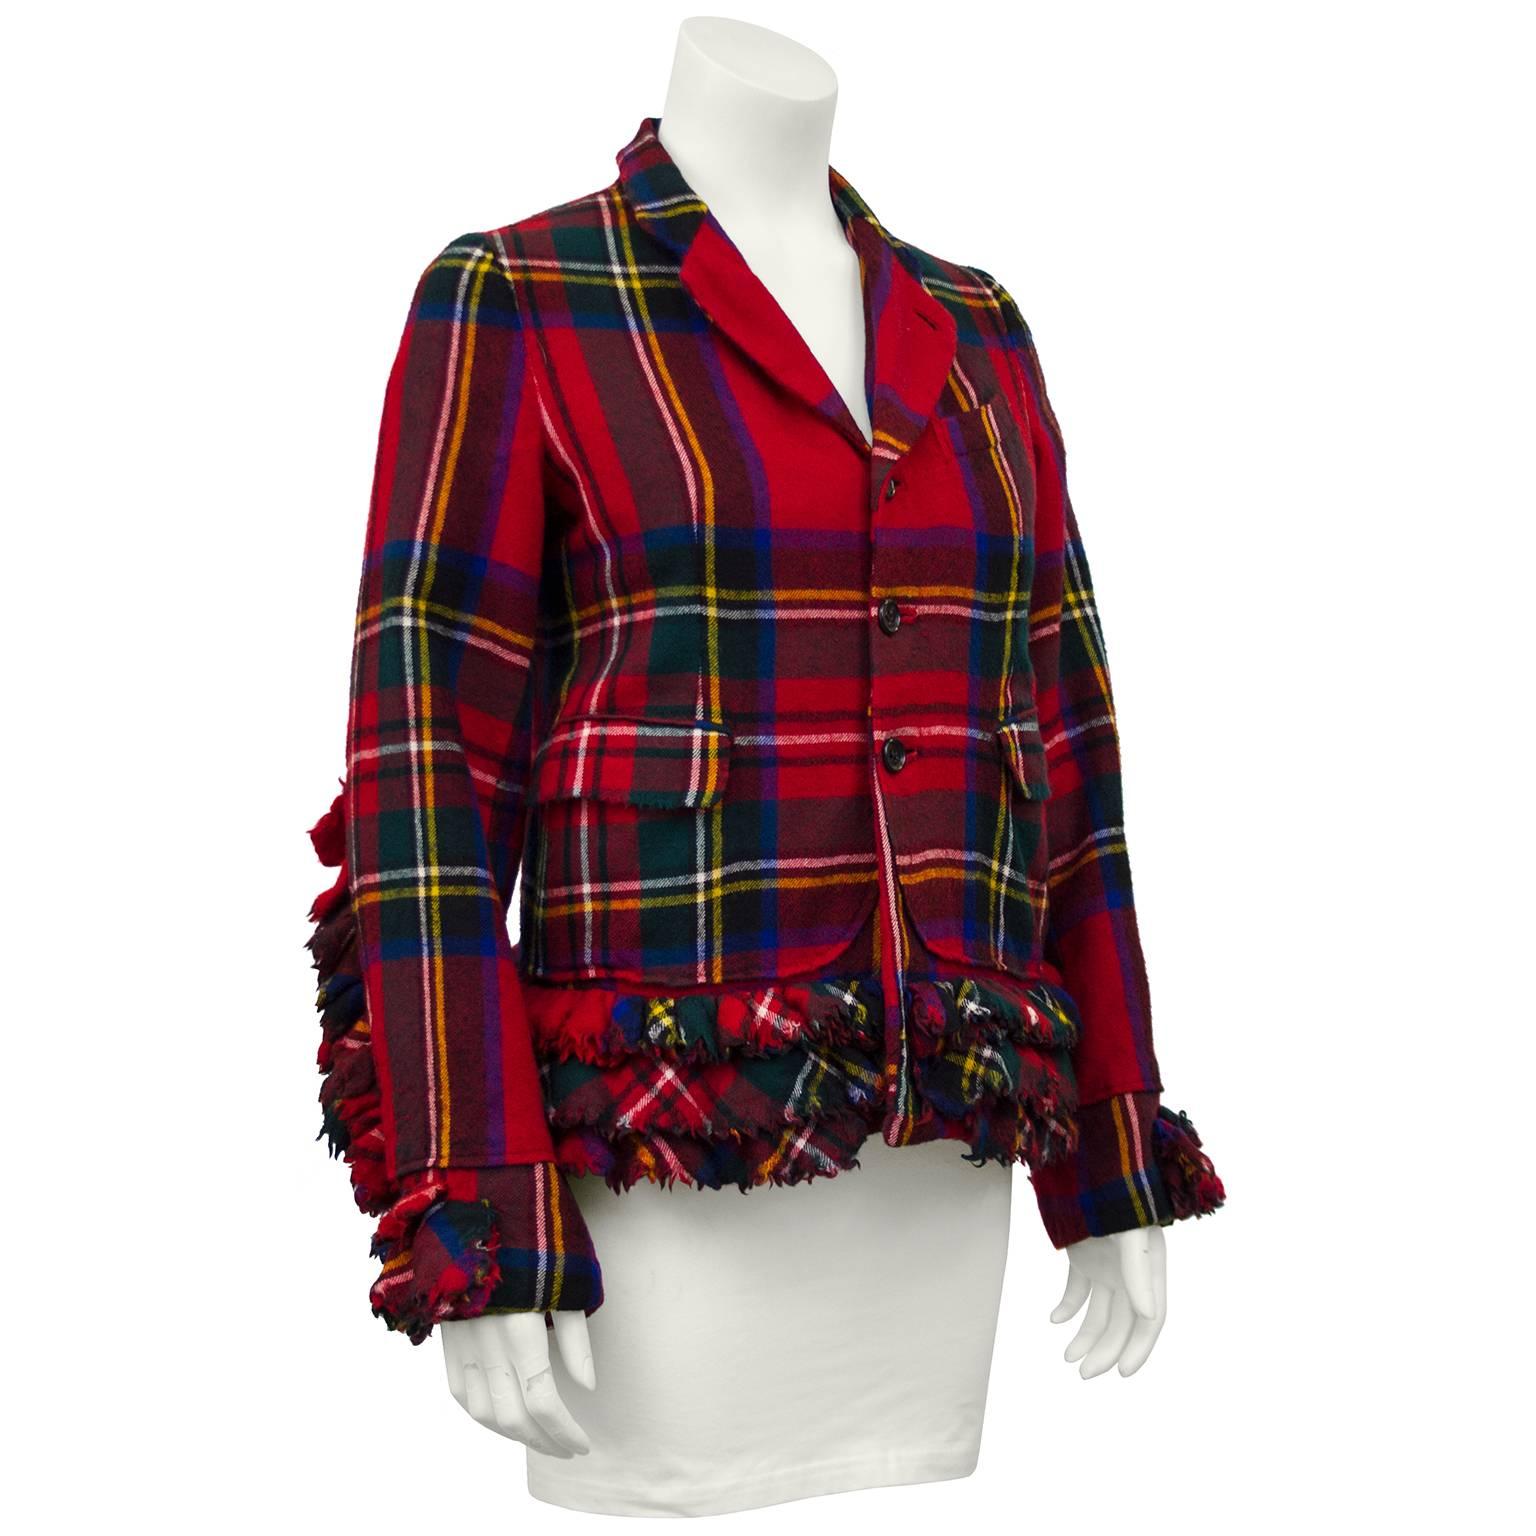 Fabulous early 2000's red tartan Commes Des Garcons jacket with 3-D ruffles framing the cuffs, hem and down the center back. Can be worn open collar or buttoned up for raised Mandarin style collar two side pockets with flaps, fully lined interior.